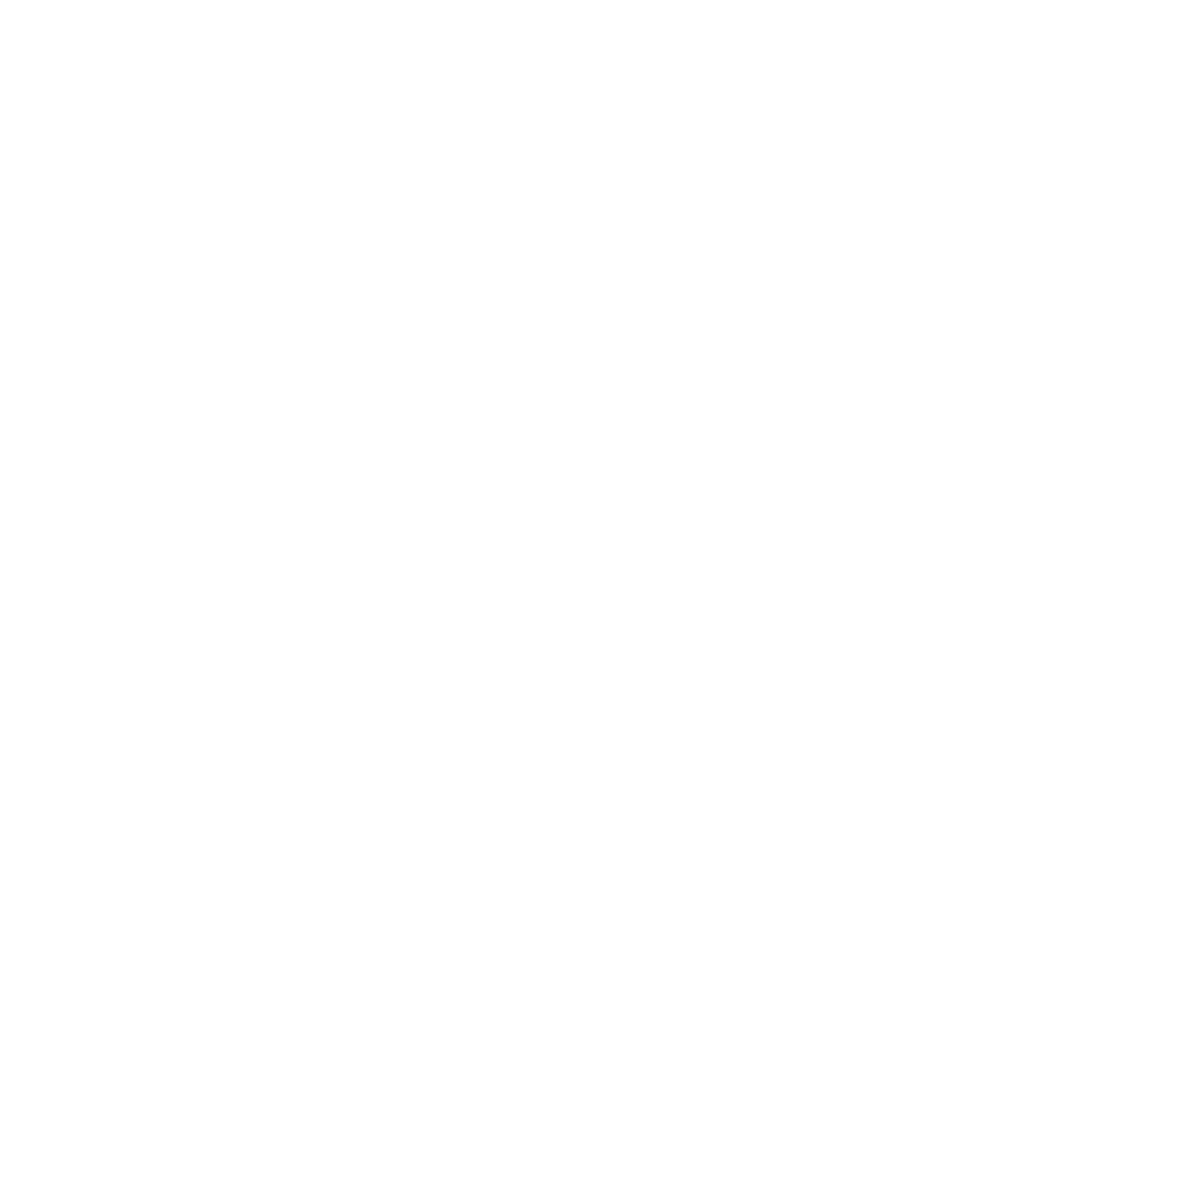 <a href="https://tevel-campers.co.il/" target= "_blank">Tevel Campers​</a> 